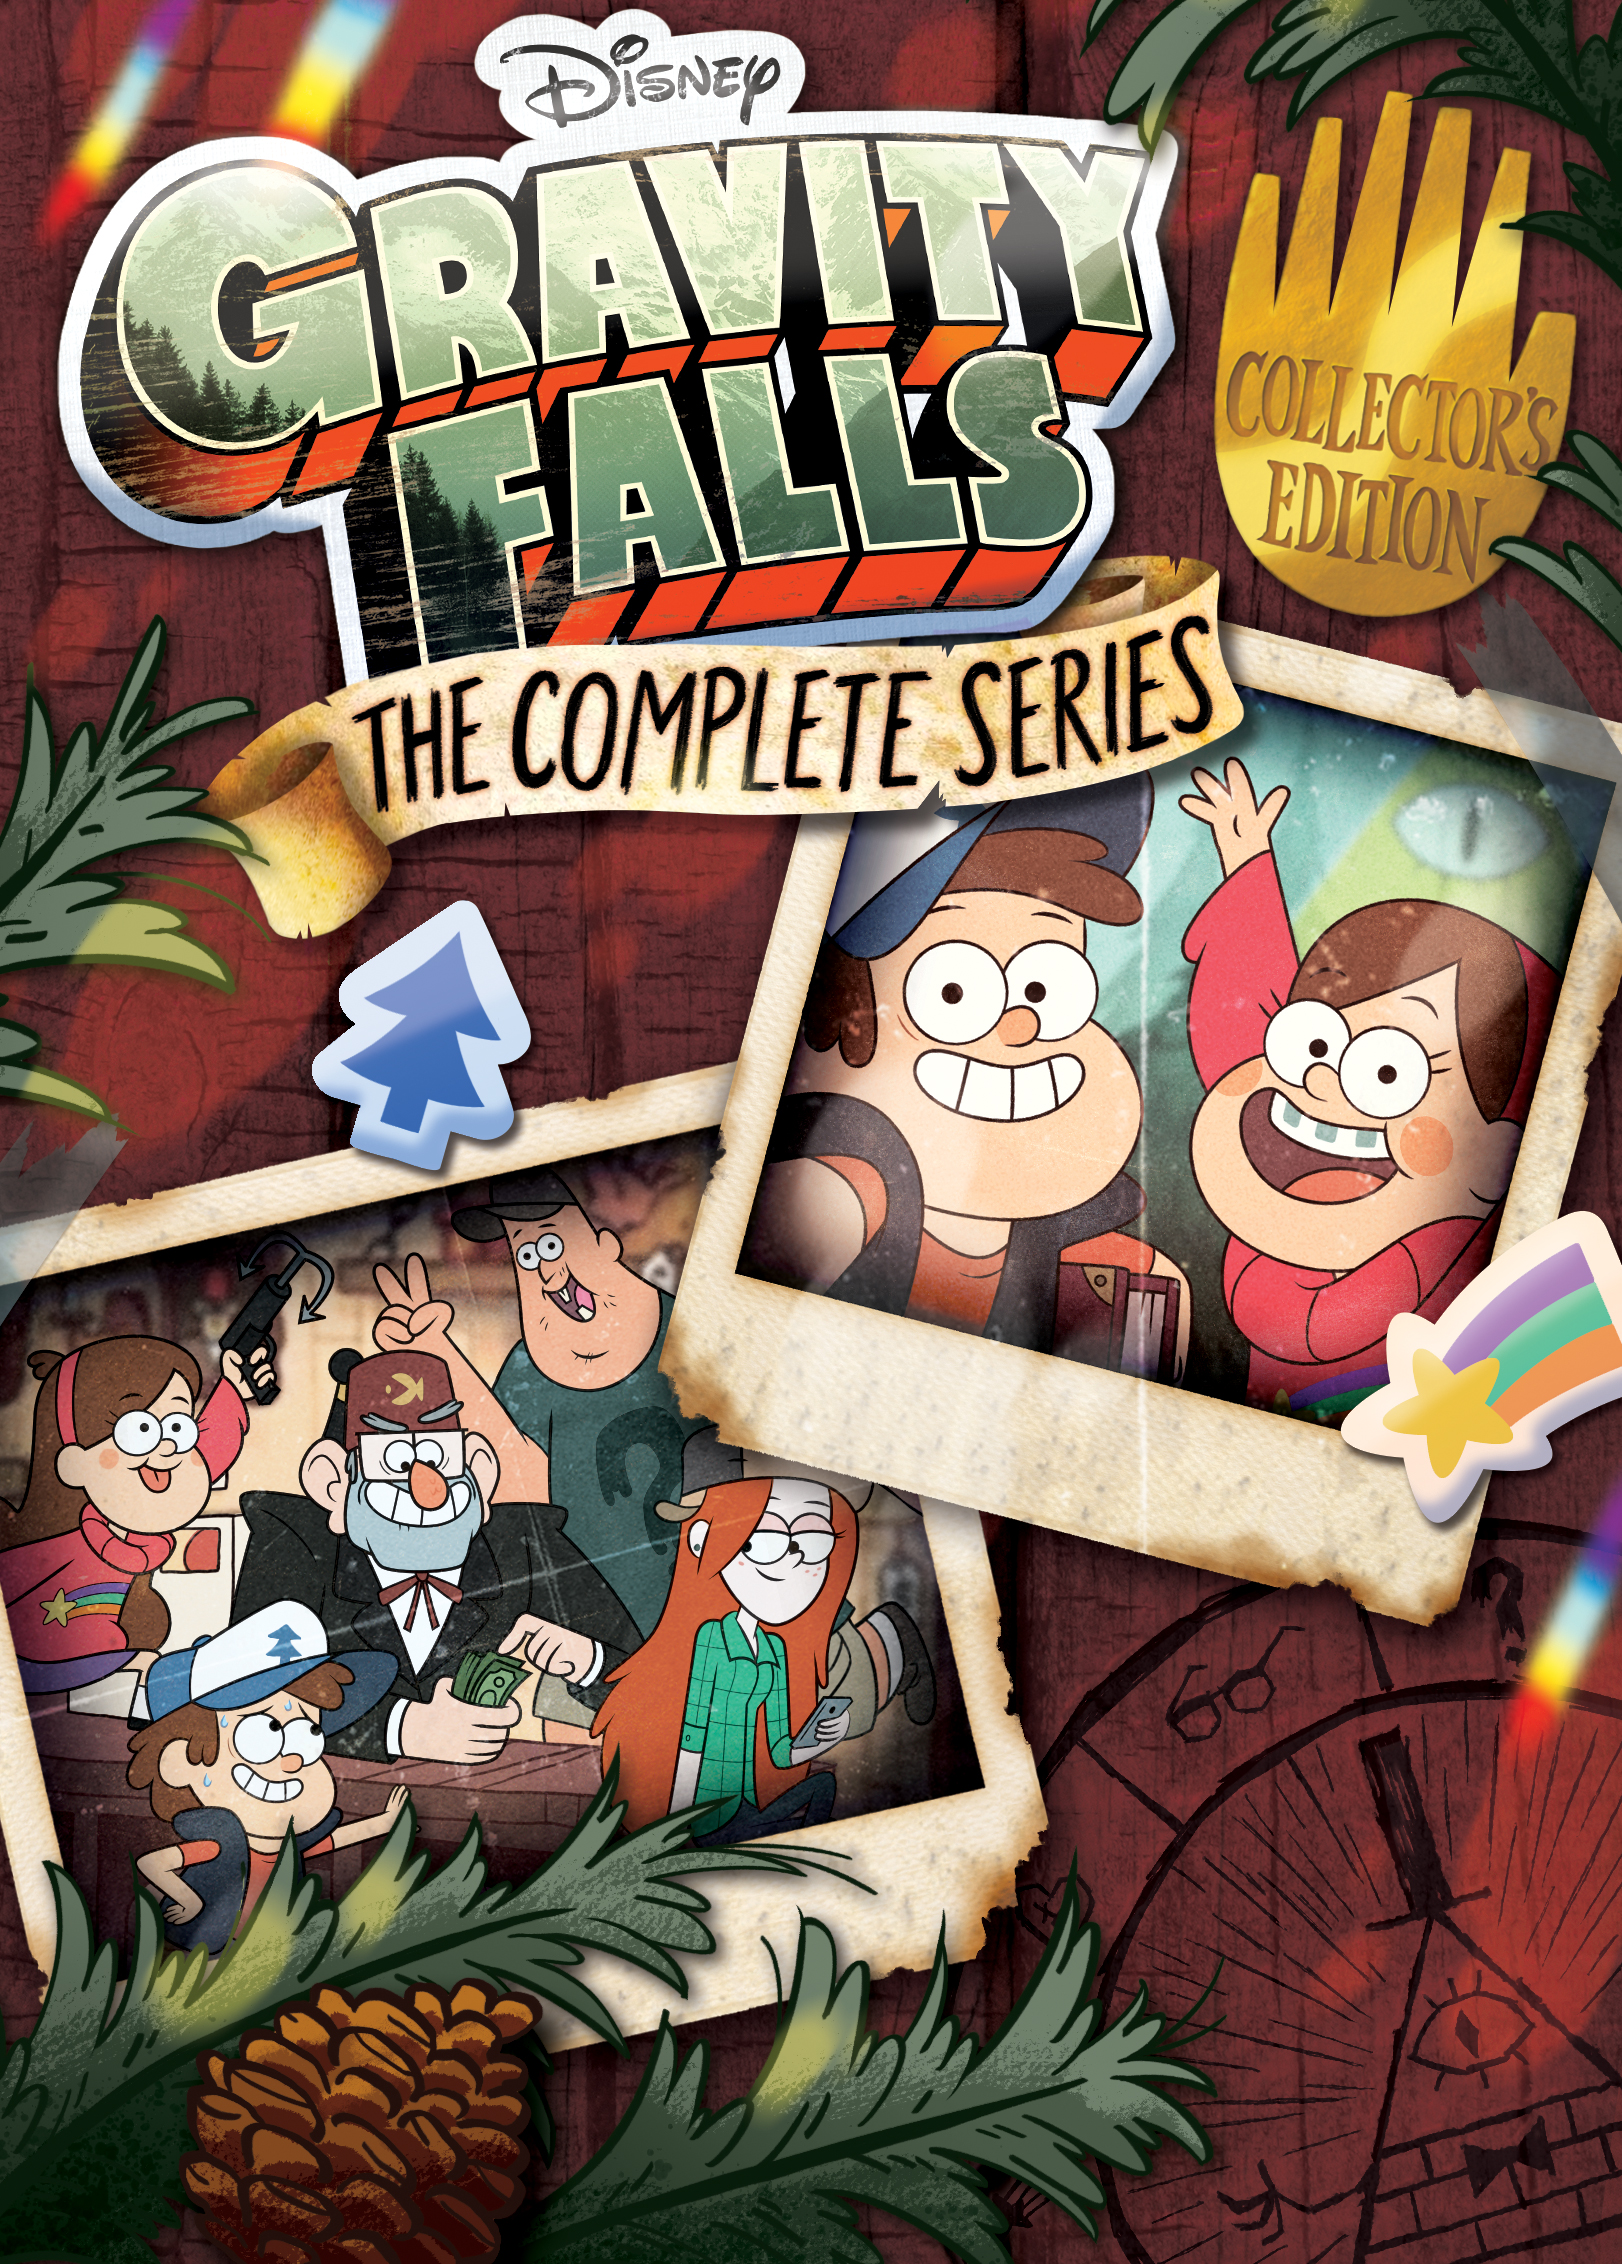 Gravity Falls: The Complete Series – Honestly, one of the best shows ever. Perfect for binge watching with friends!